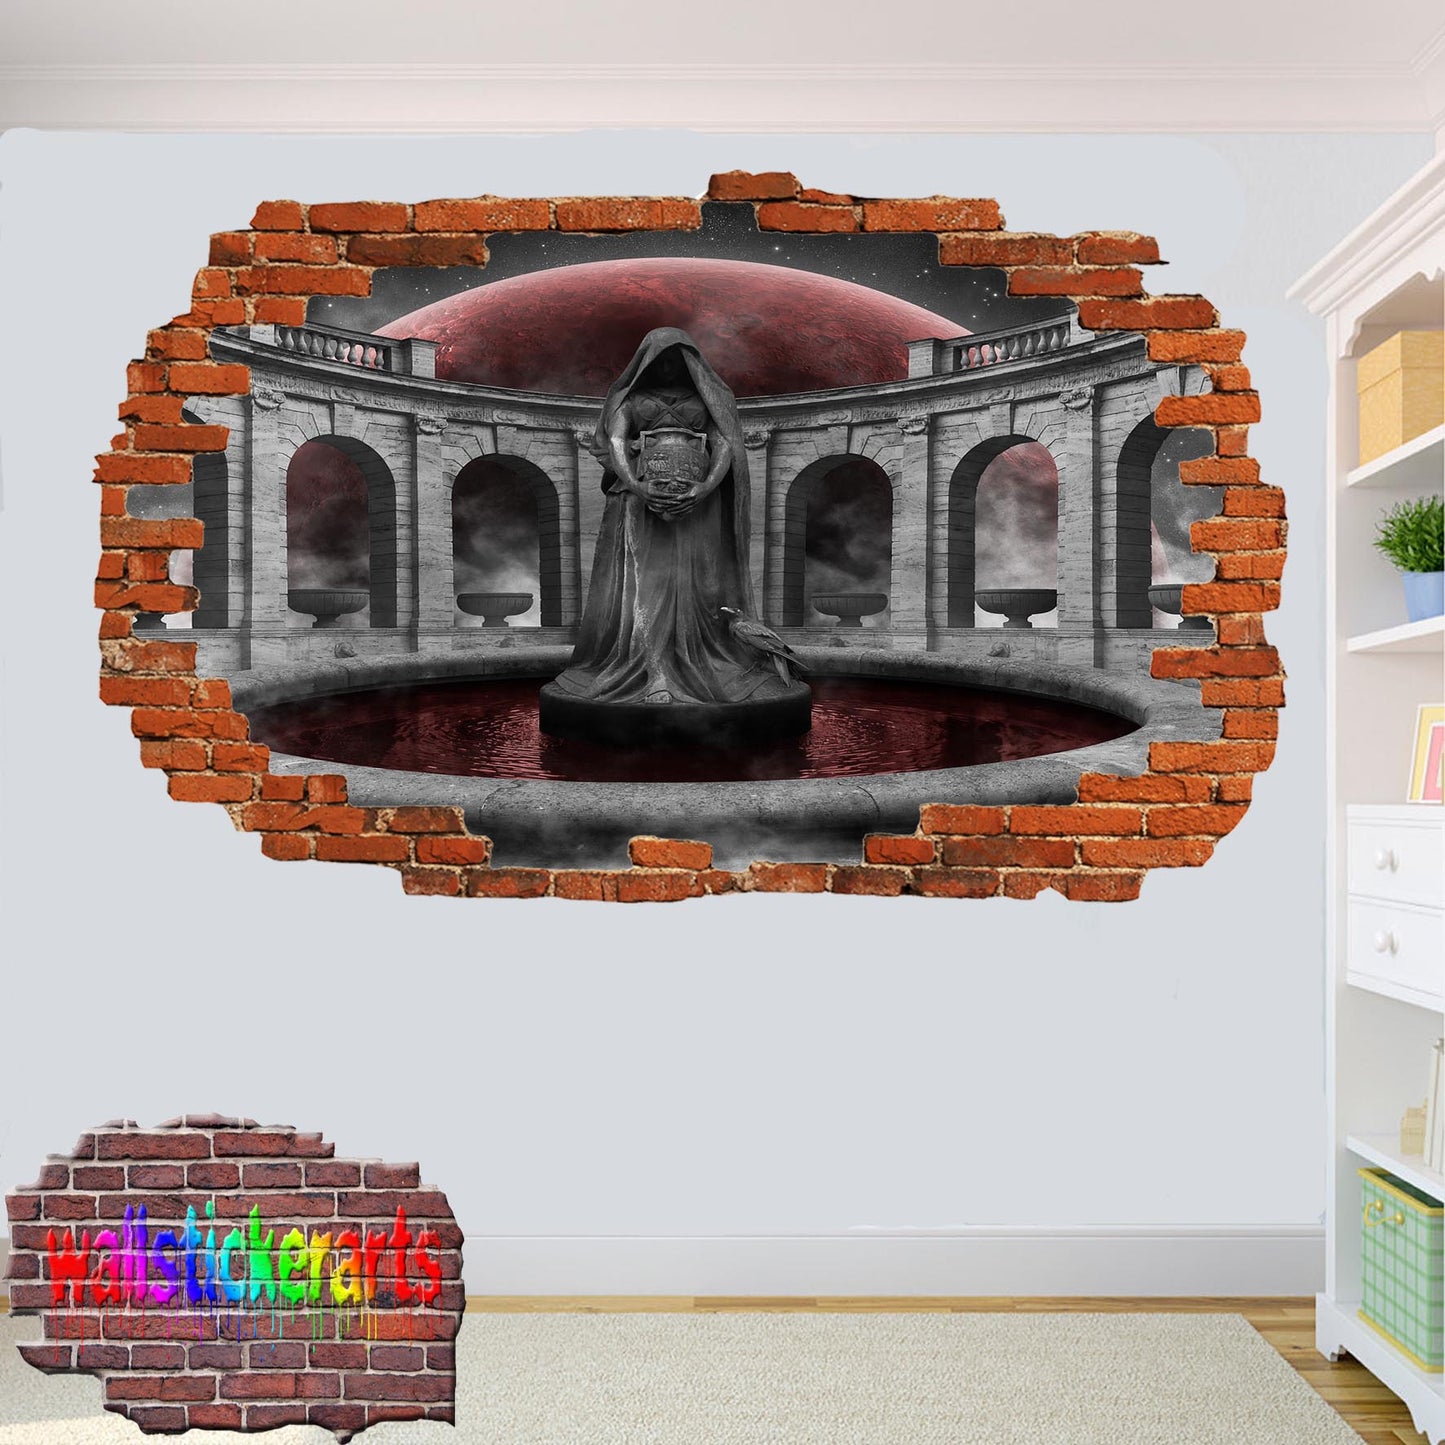 Gothic Fantasy Red Planet 3d Smashed Wall Sticker Room Decoration Decal Mural